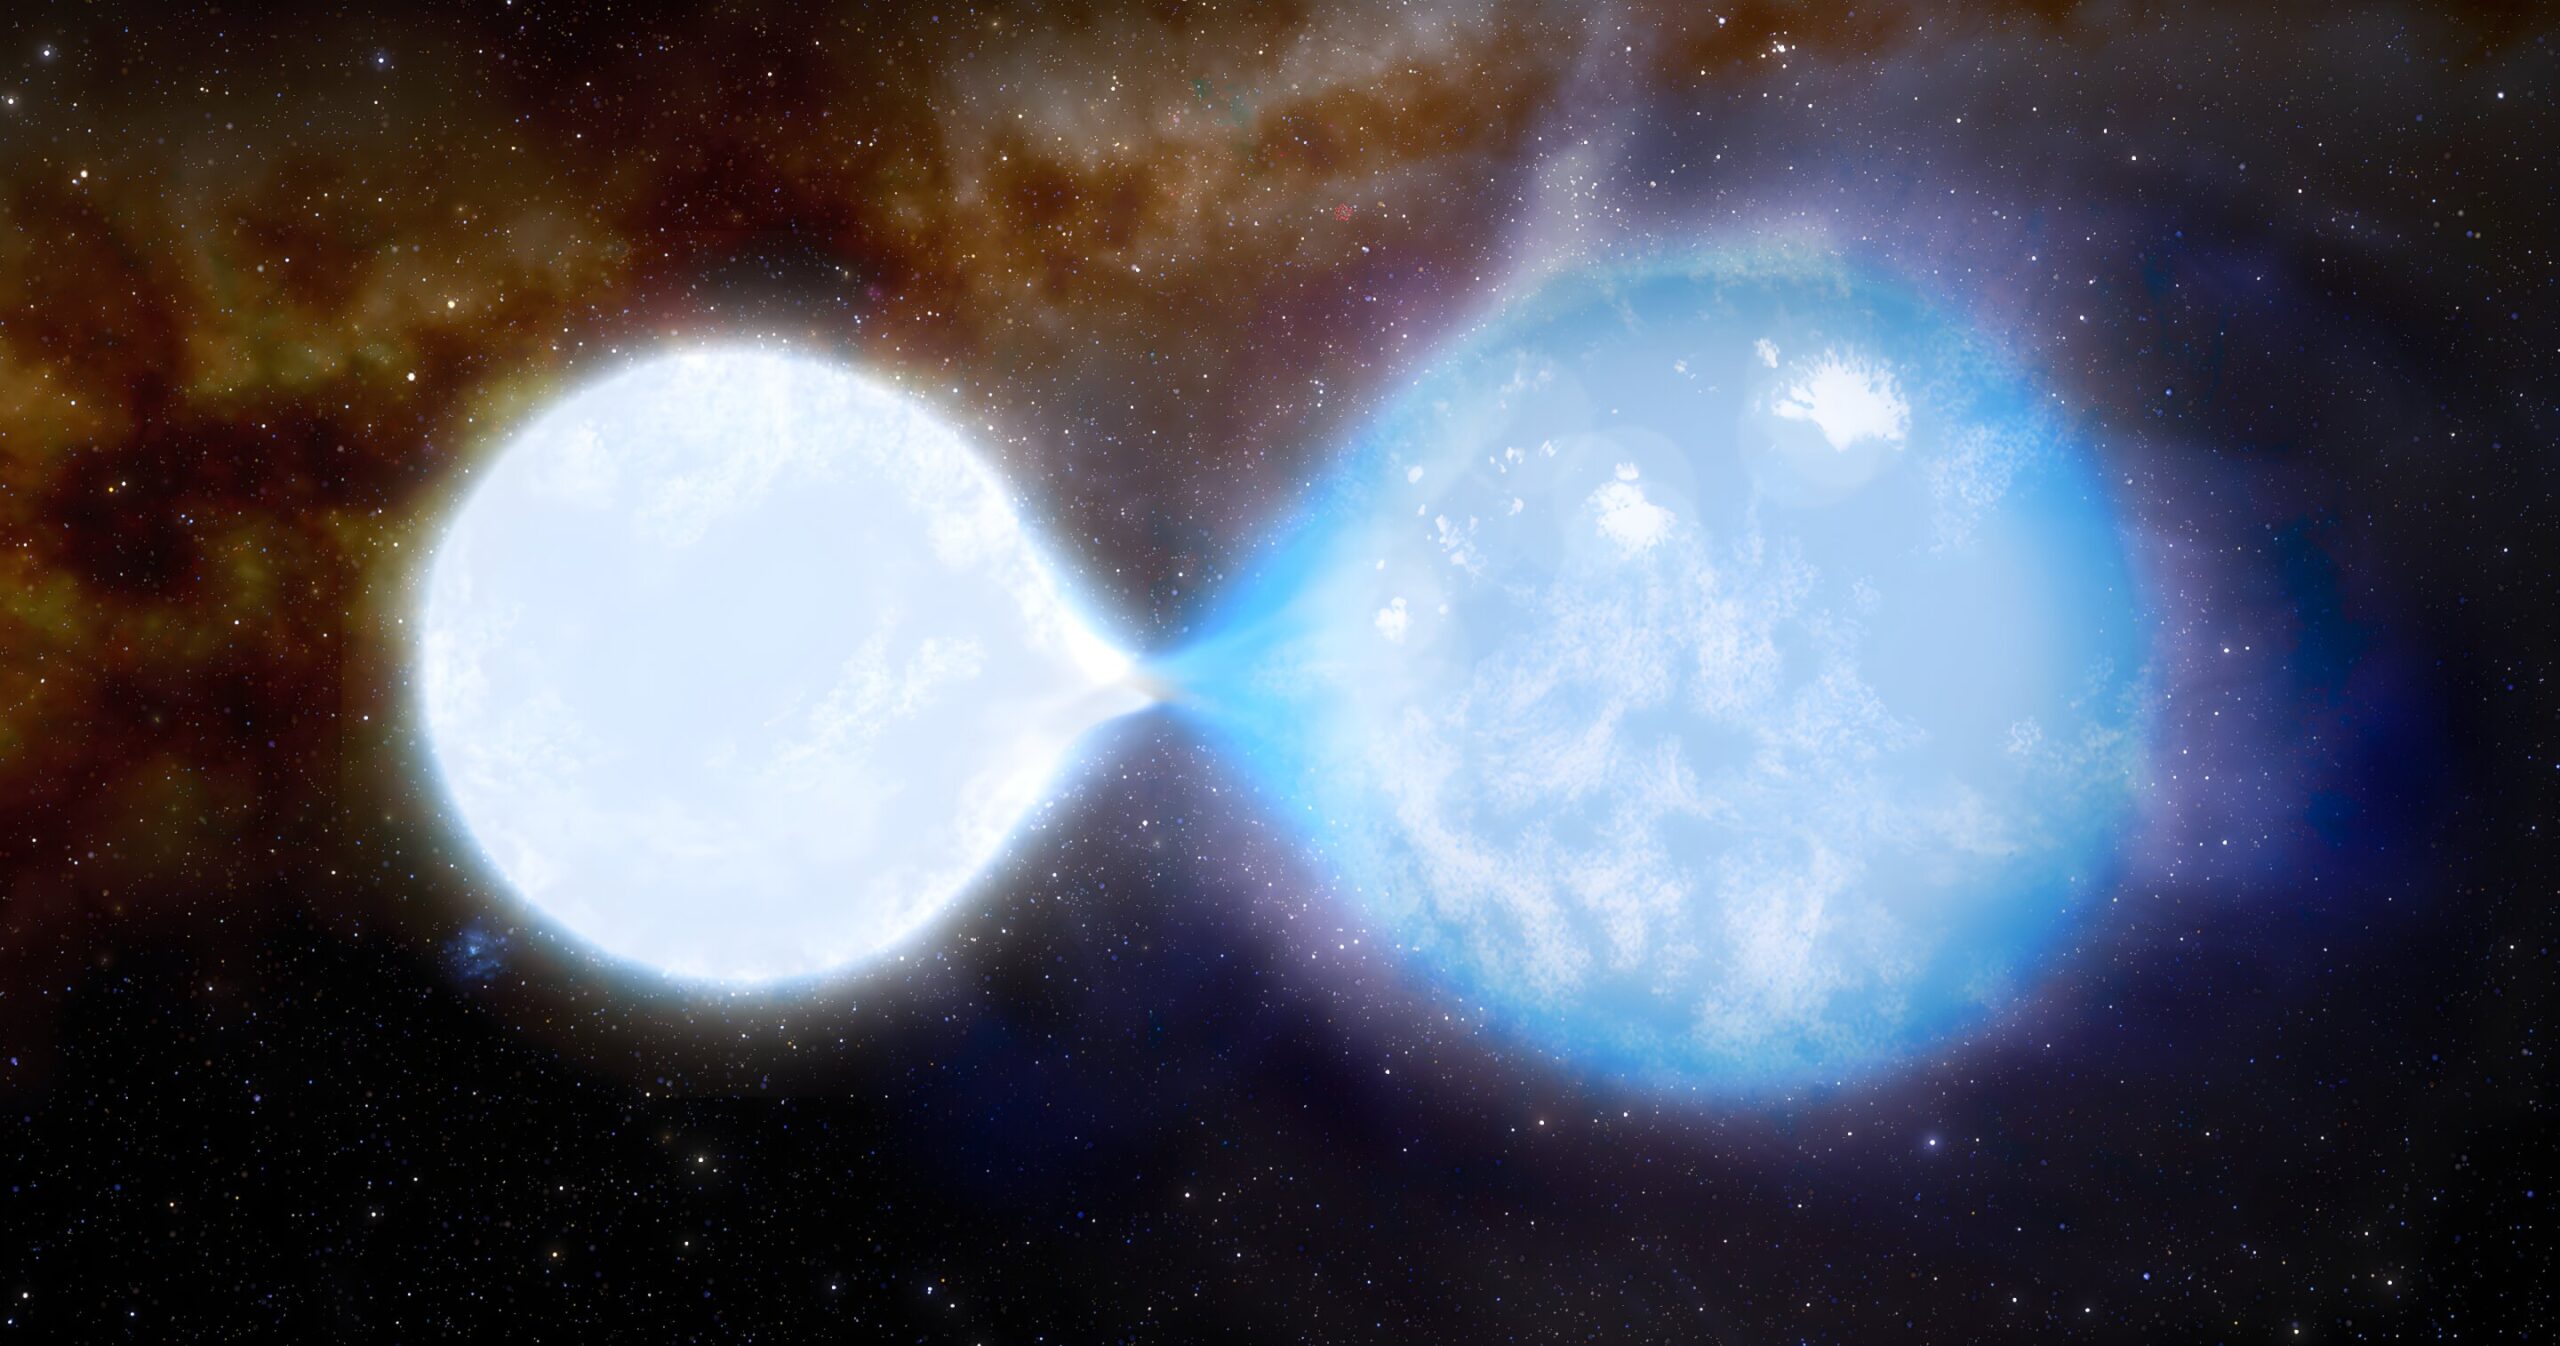 Giant pair of interconnected stars will turn into black holes